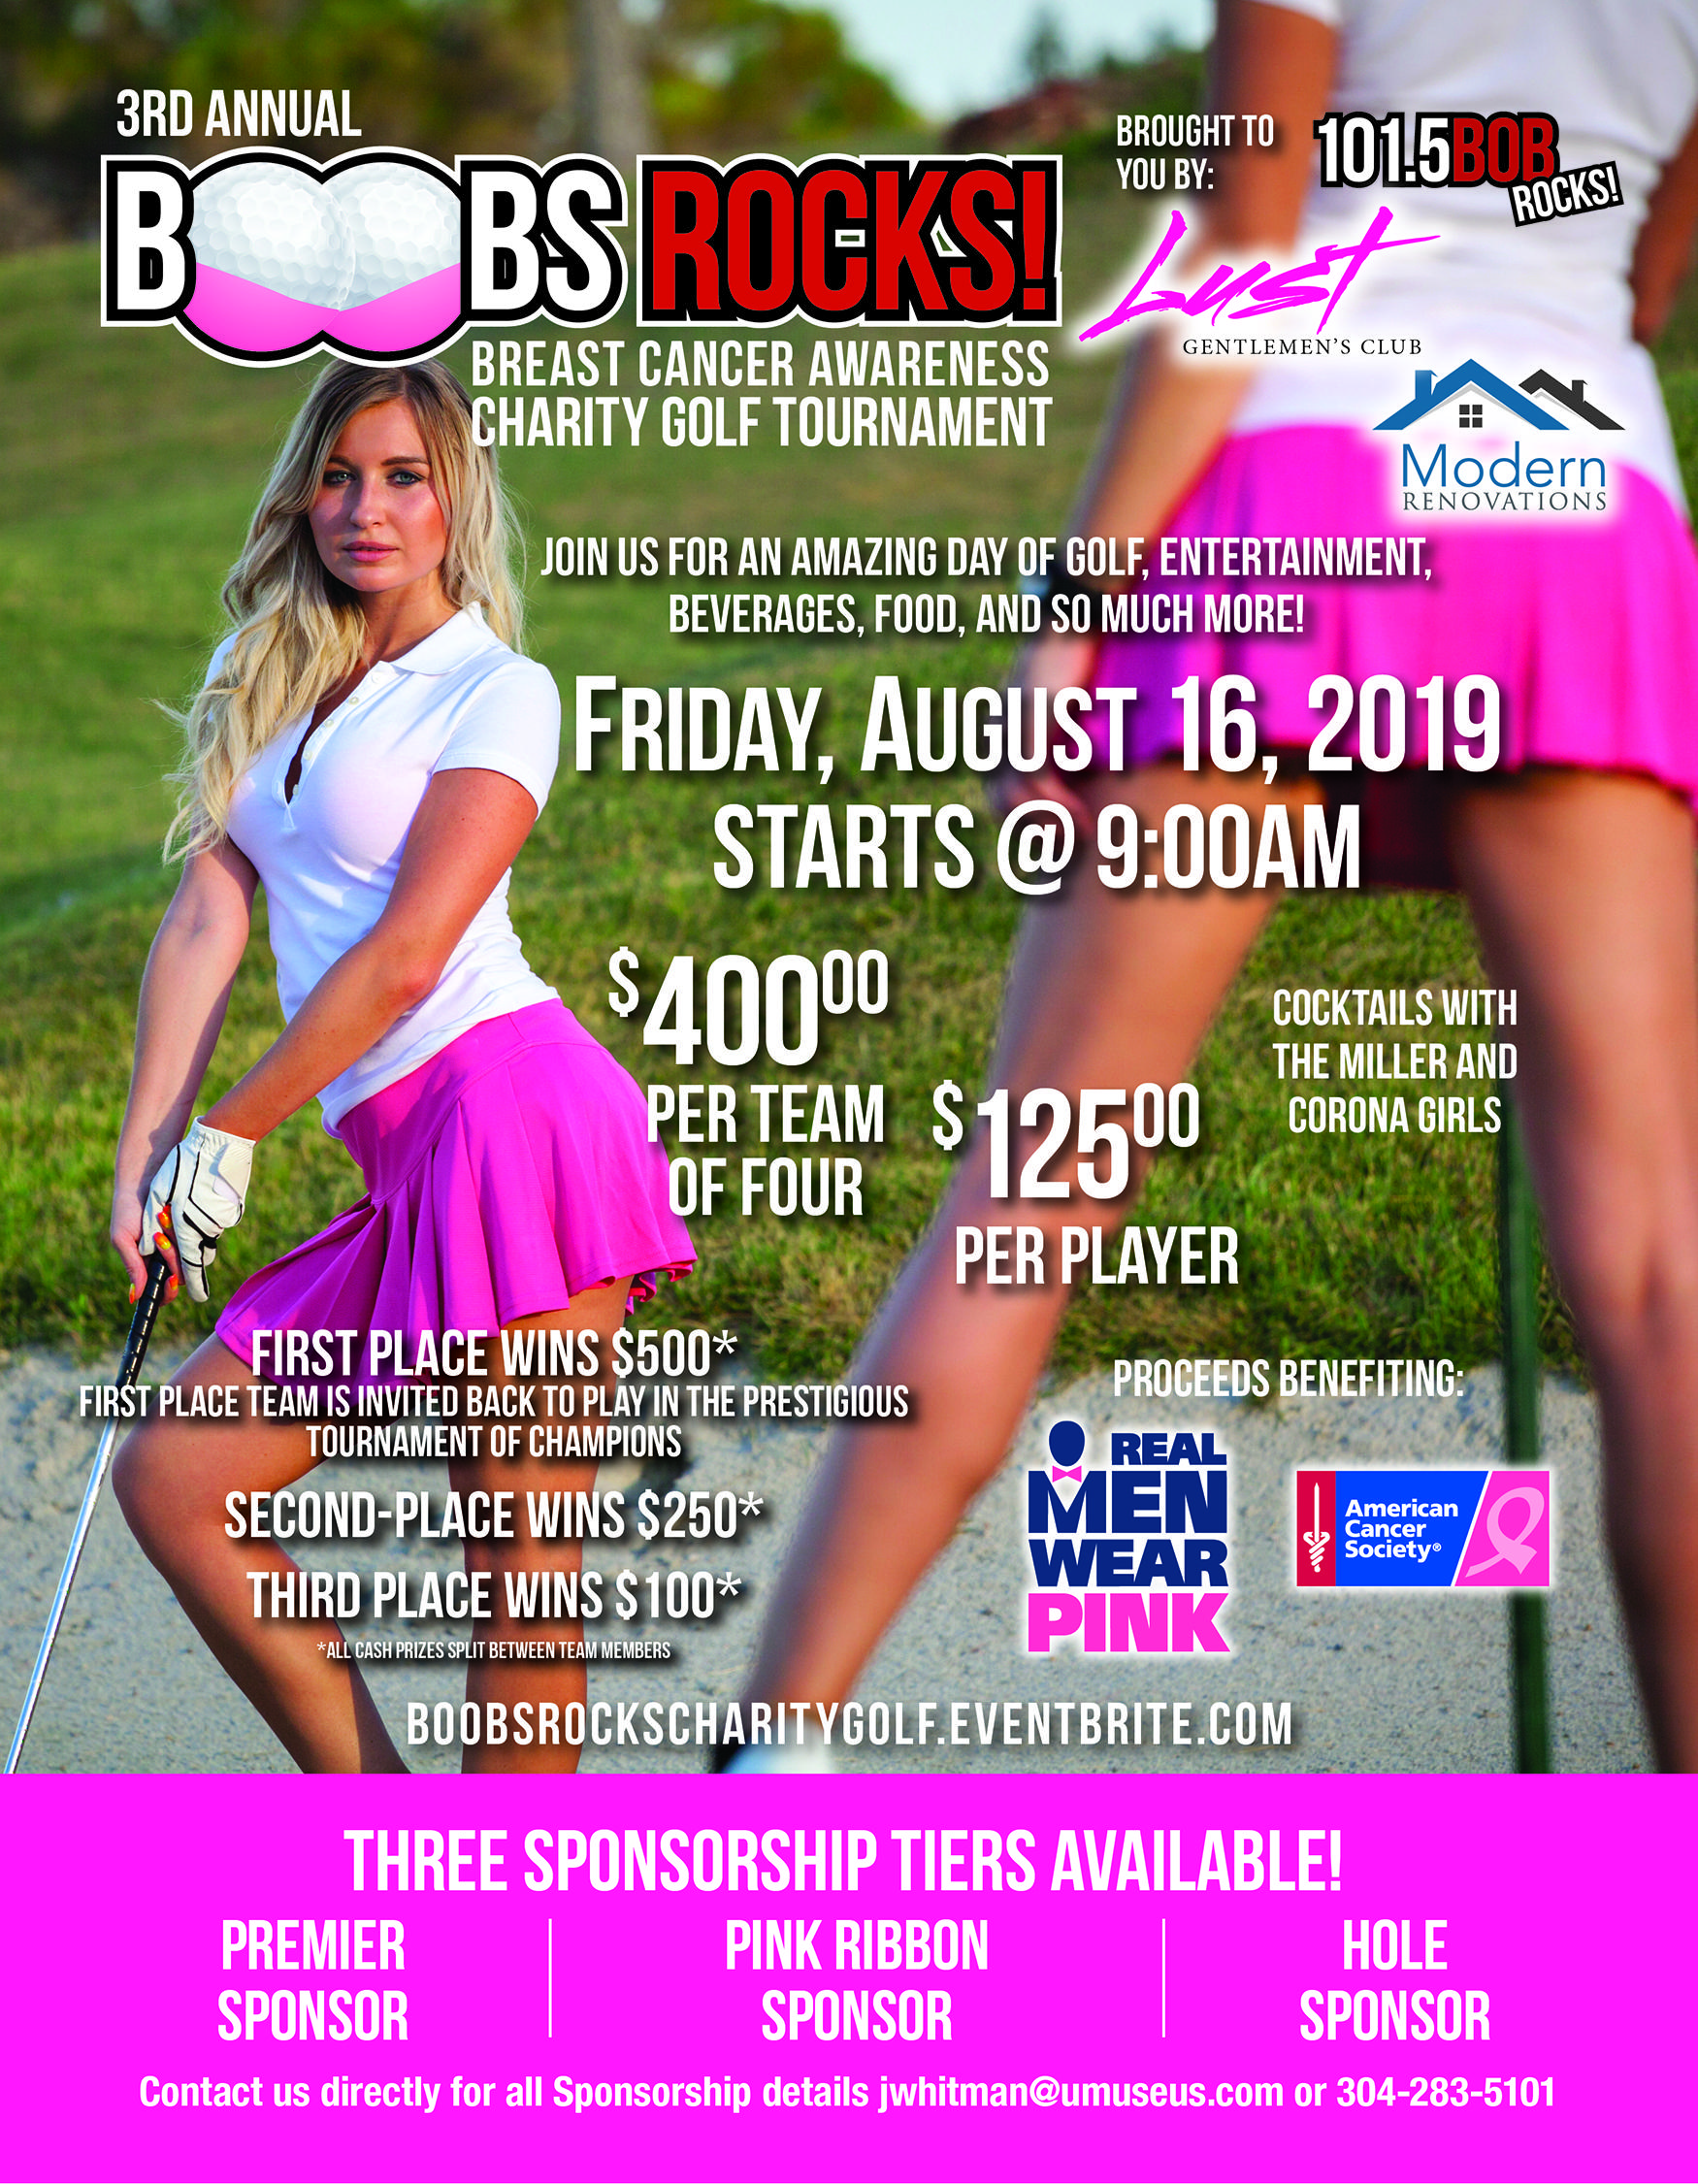 3RD Annual BOOBS ROCKS Breast Cancer Awareness Charity Golf Tournament